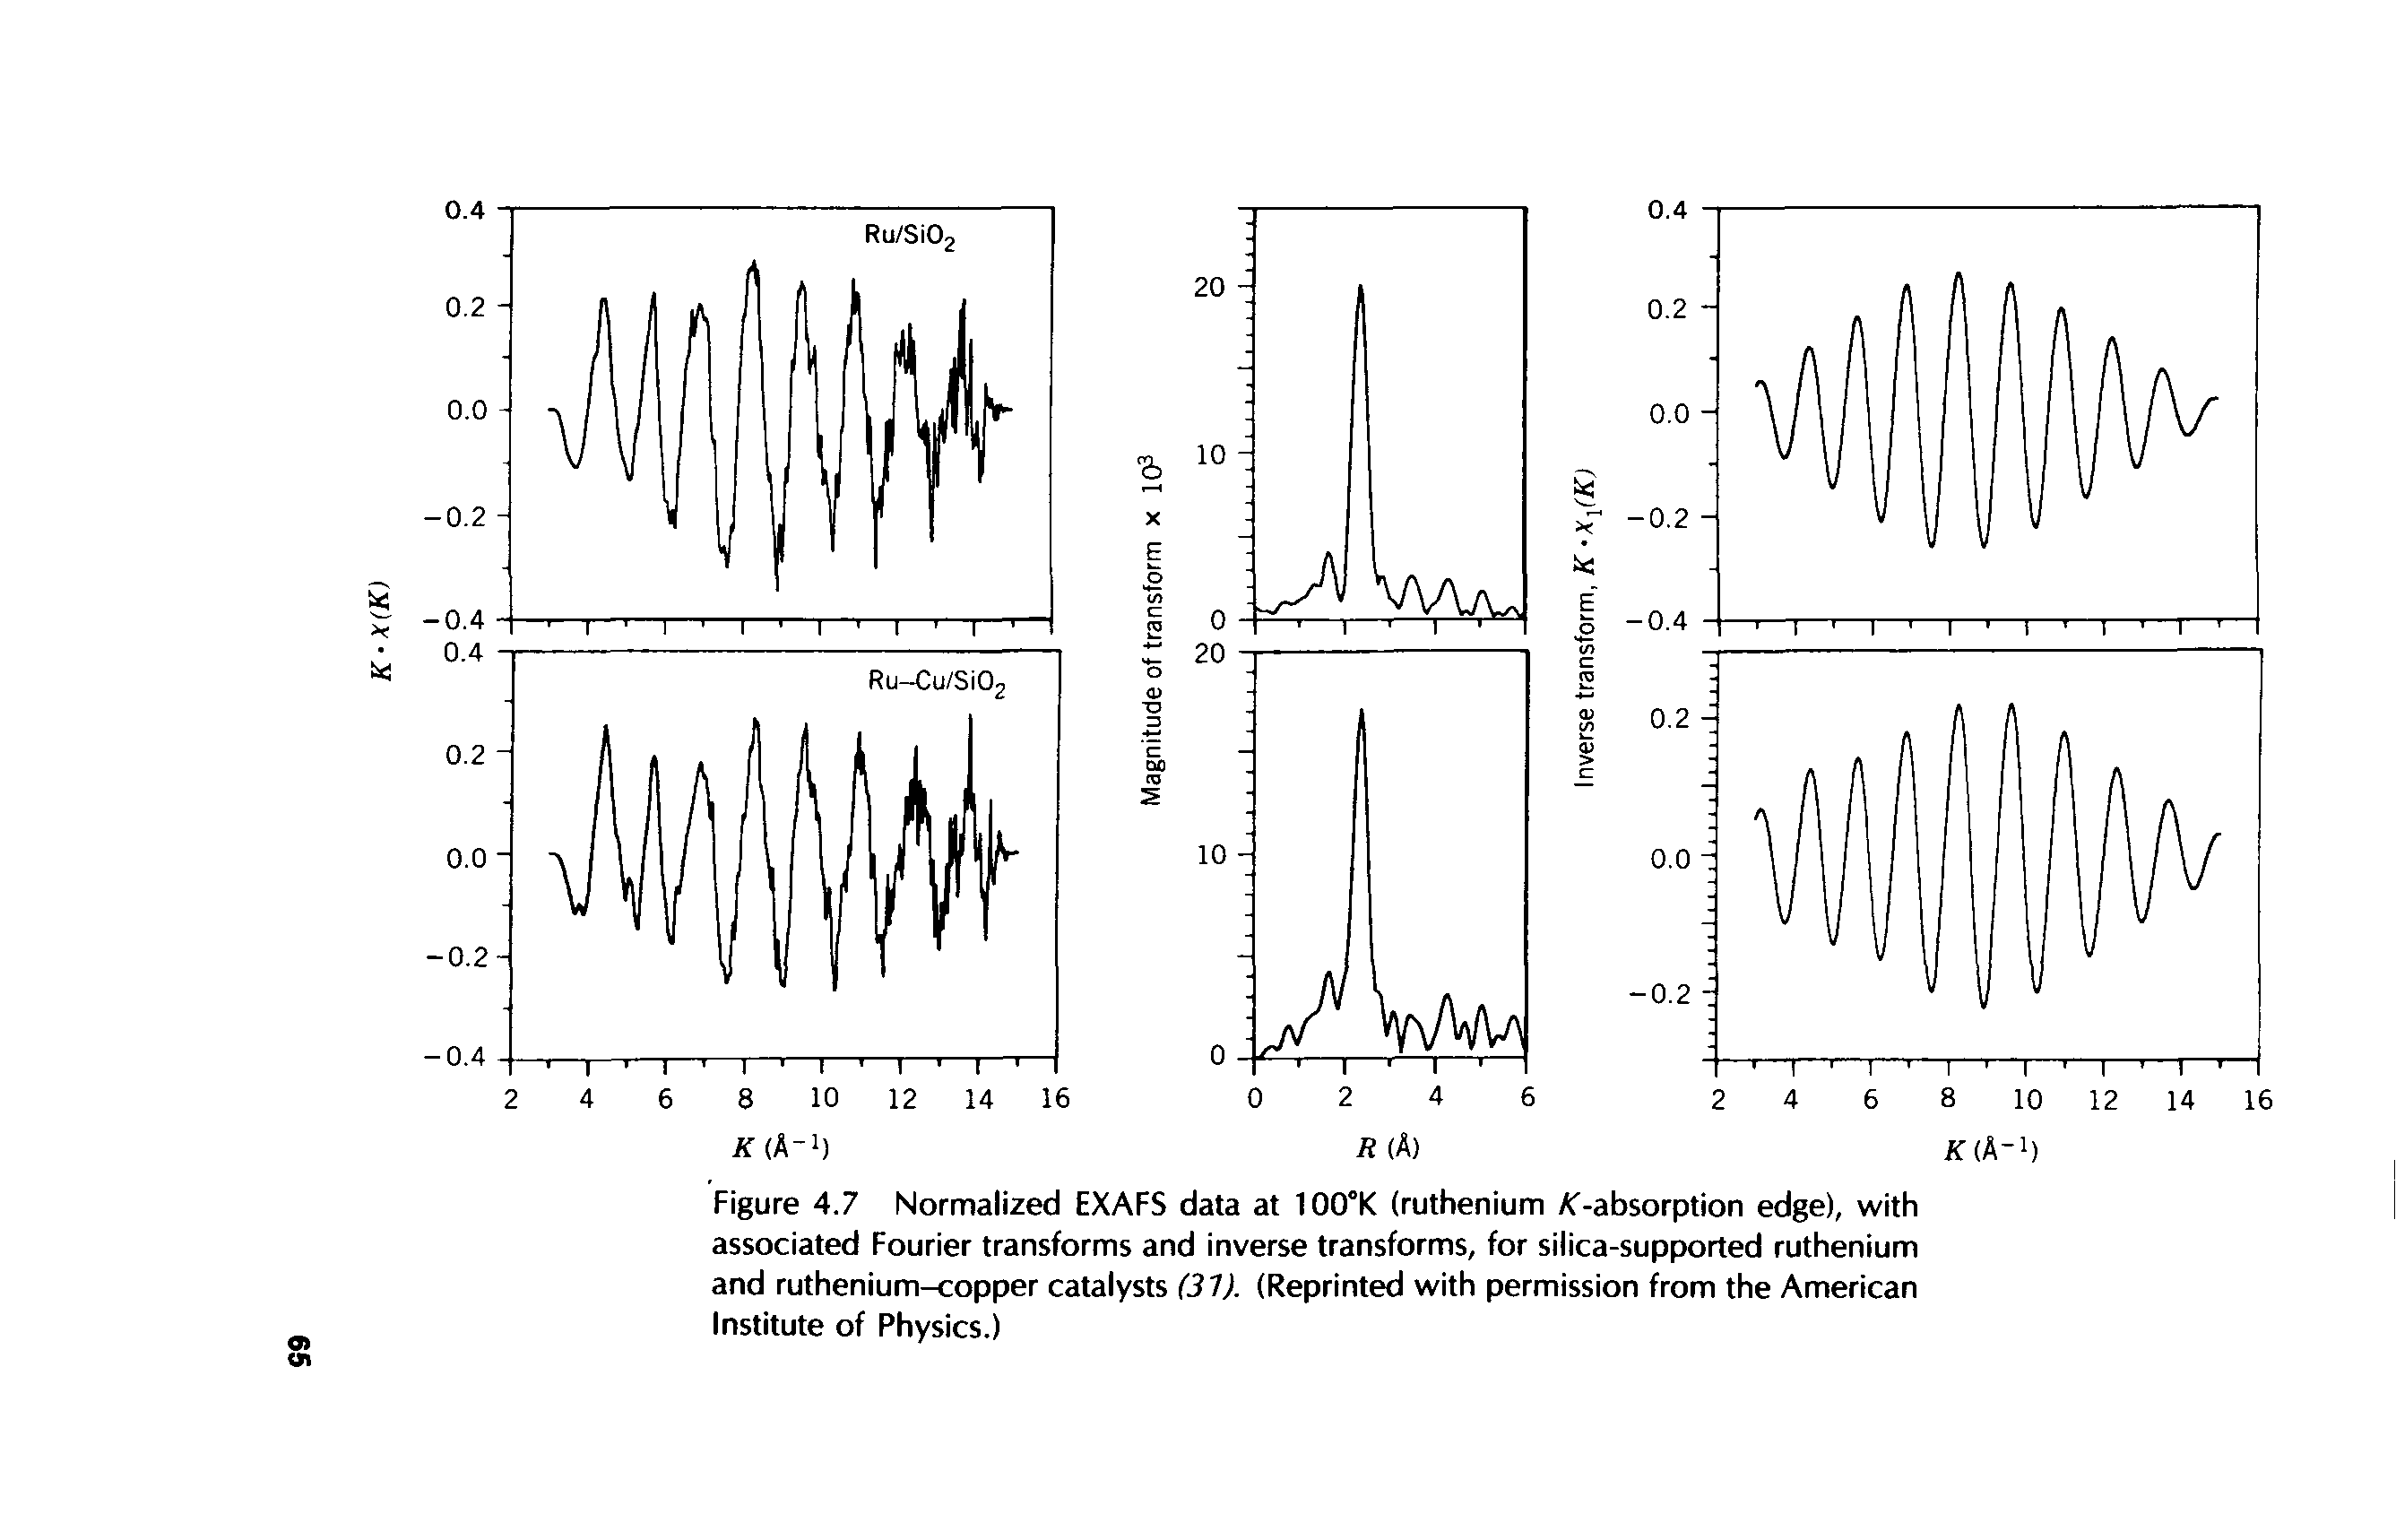 Figure 4.7 Normalized EXAFS data at 100°K (ruthenium AT-absorption edge), with associated Fourier transforms and inverse transforms, for silica-supported ruthenium and ruthenium-copper catalysts (31). (Reprinted with permission from the American Institute of Physics.)...